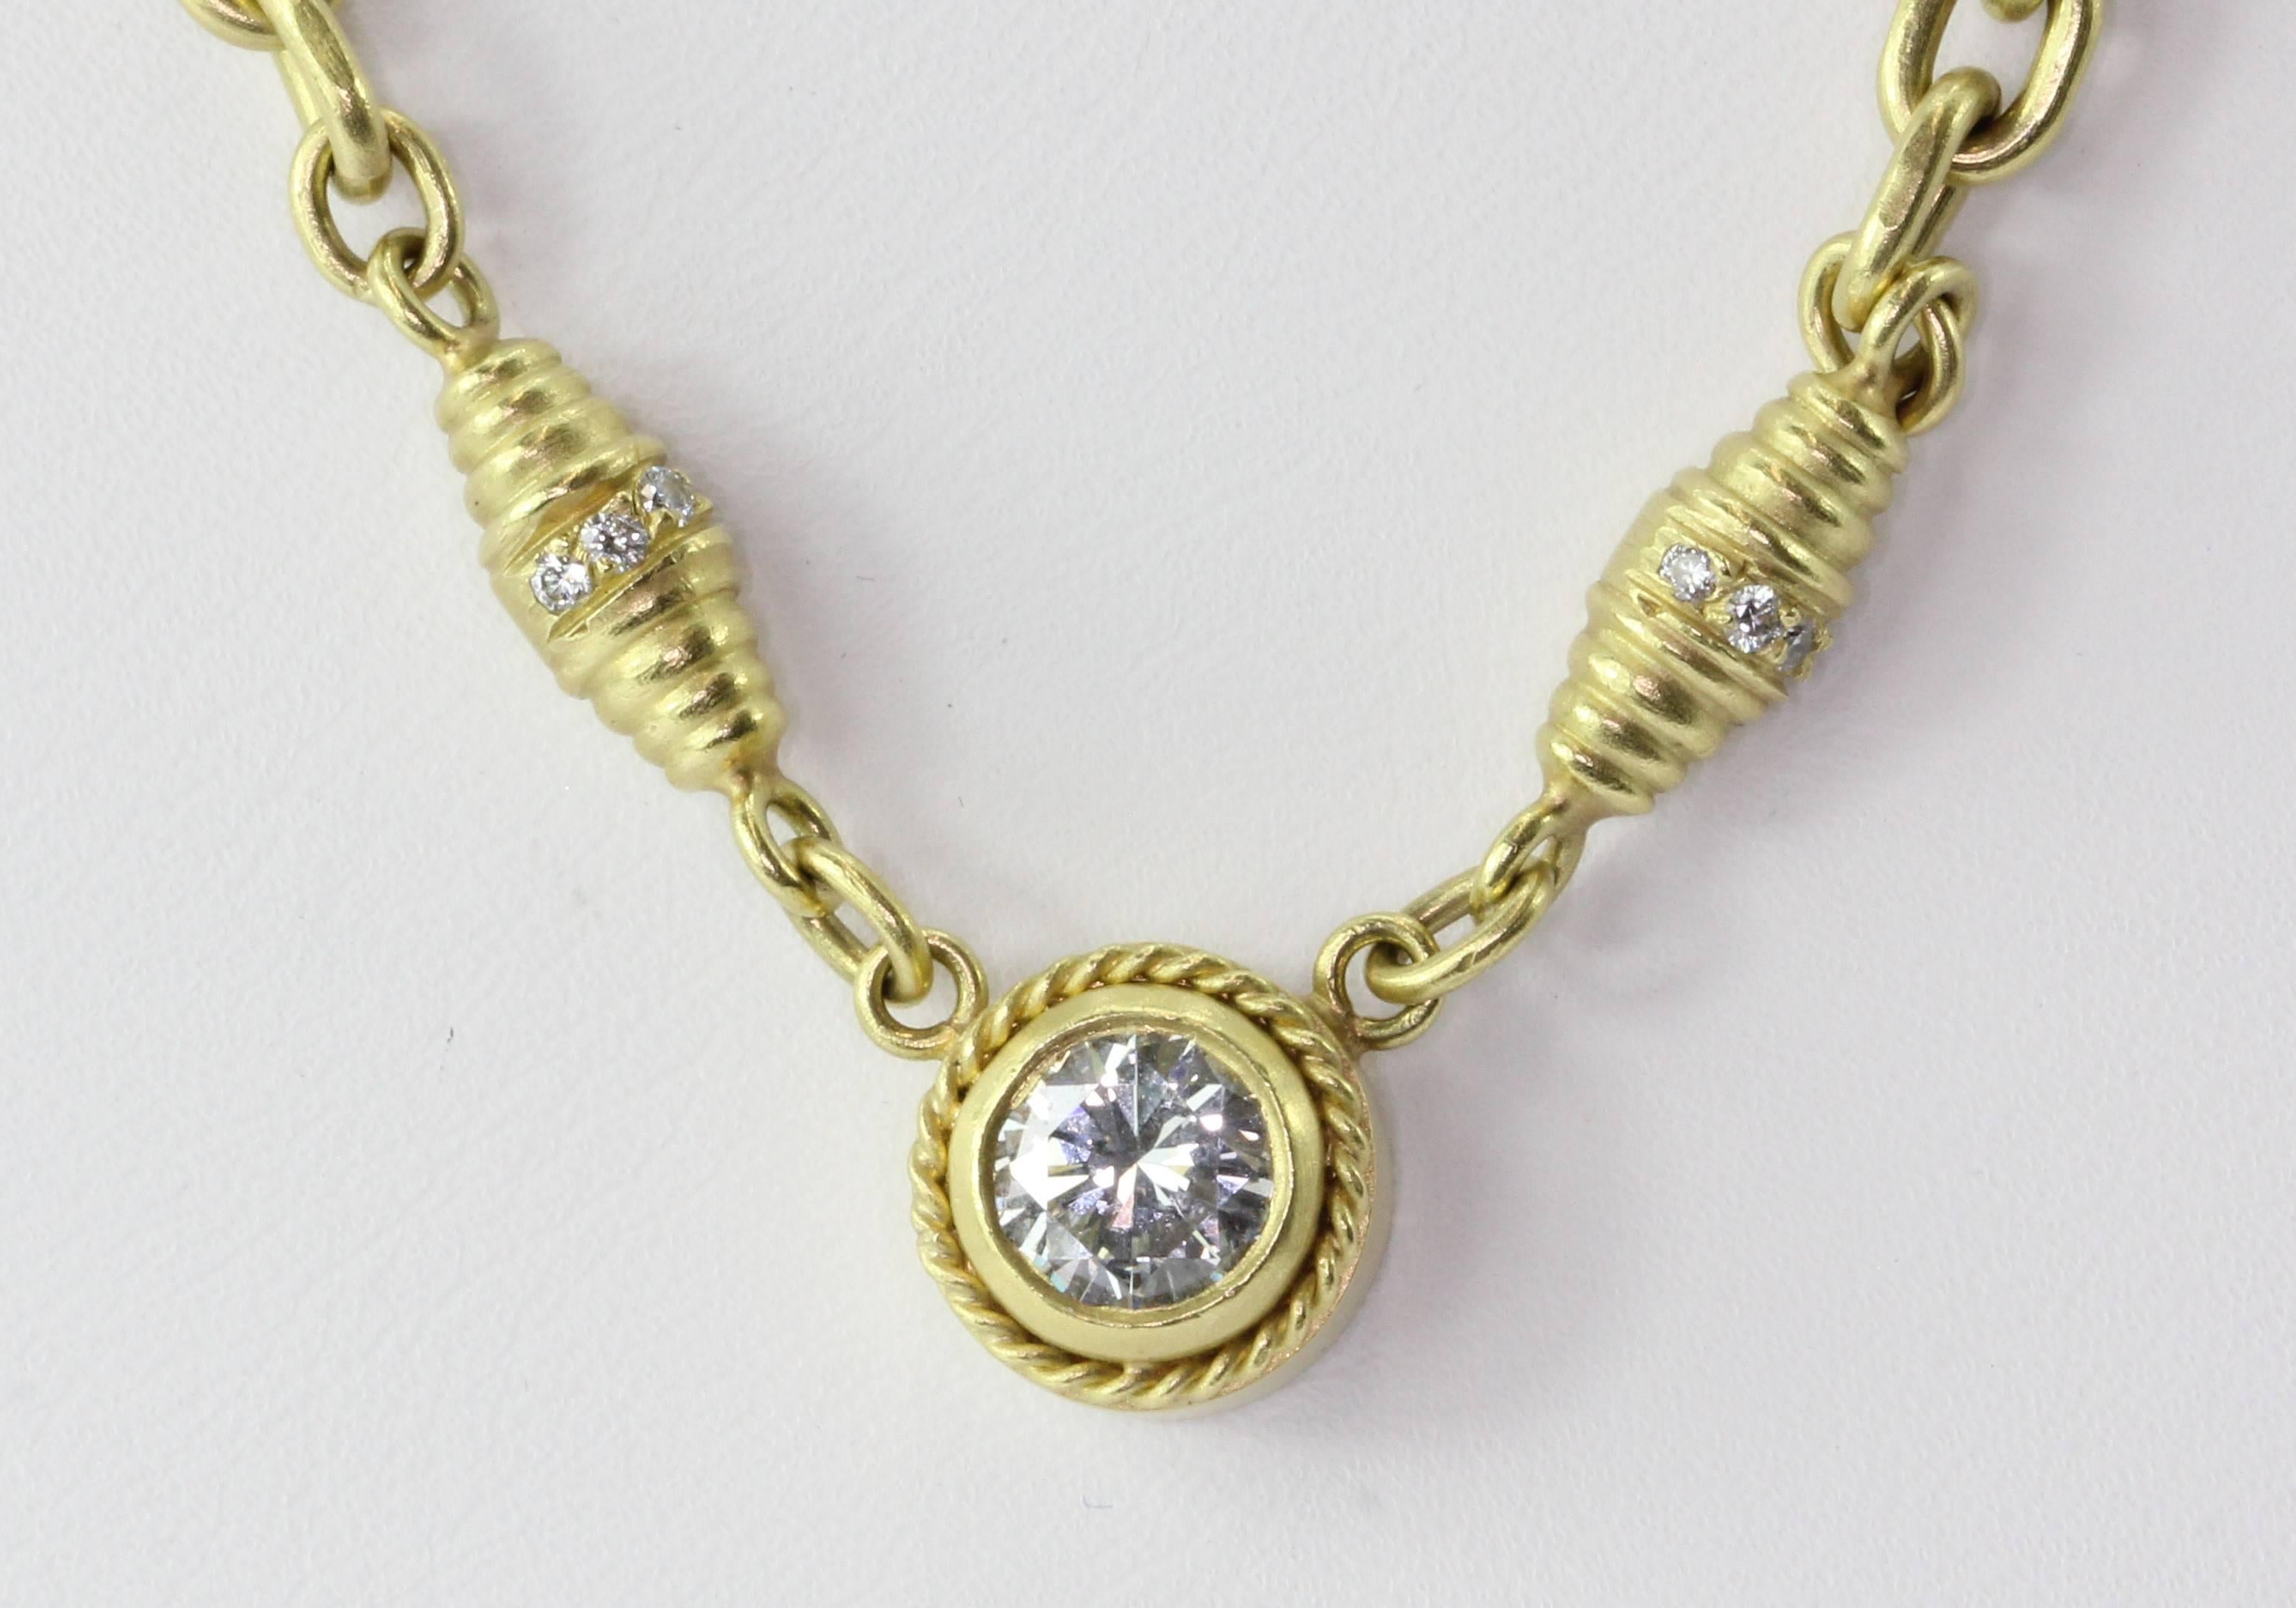 18K Brushed Finished Yellow Gold 1 Carat Diamond Solitaire Necklace. The necklace is in excellent estate condition and ready to wear. The peice is hallmarked 750. The piece has been finished in a sating or burnished finish. The center diamond is an